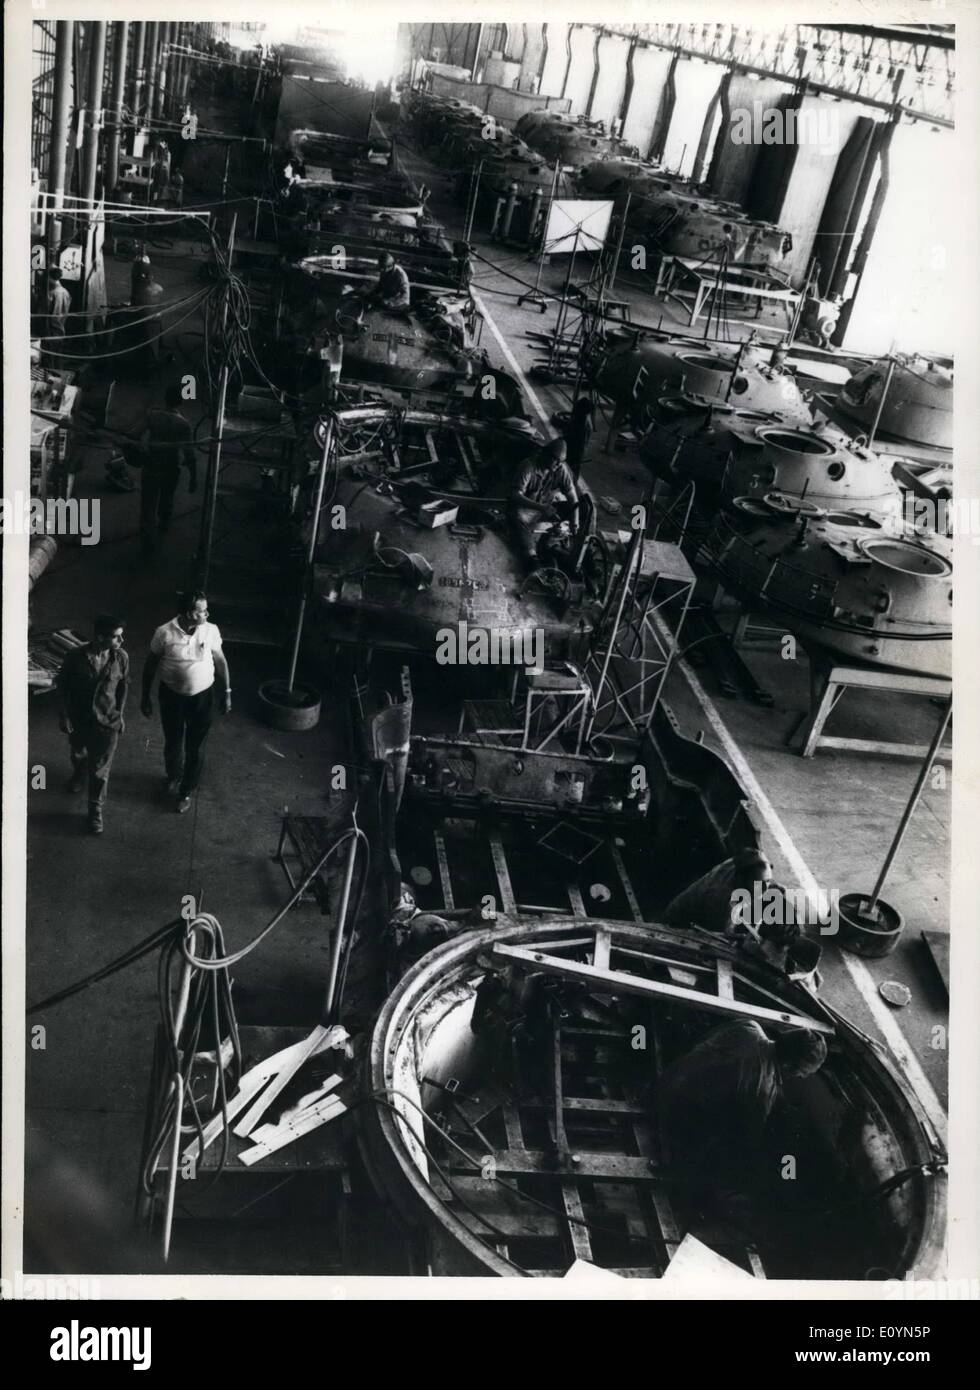 Nov. 11, 1970 - Israel Salvages Scrapped Tanks: Production line of Patton tanks in the ''Valley of Junk'' plant for reconditioning scrap tanks for the IDF (Israel Defense Forces) Stock Photo